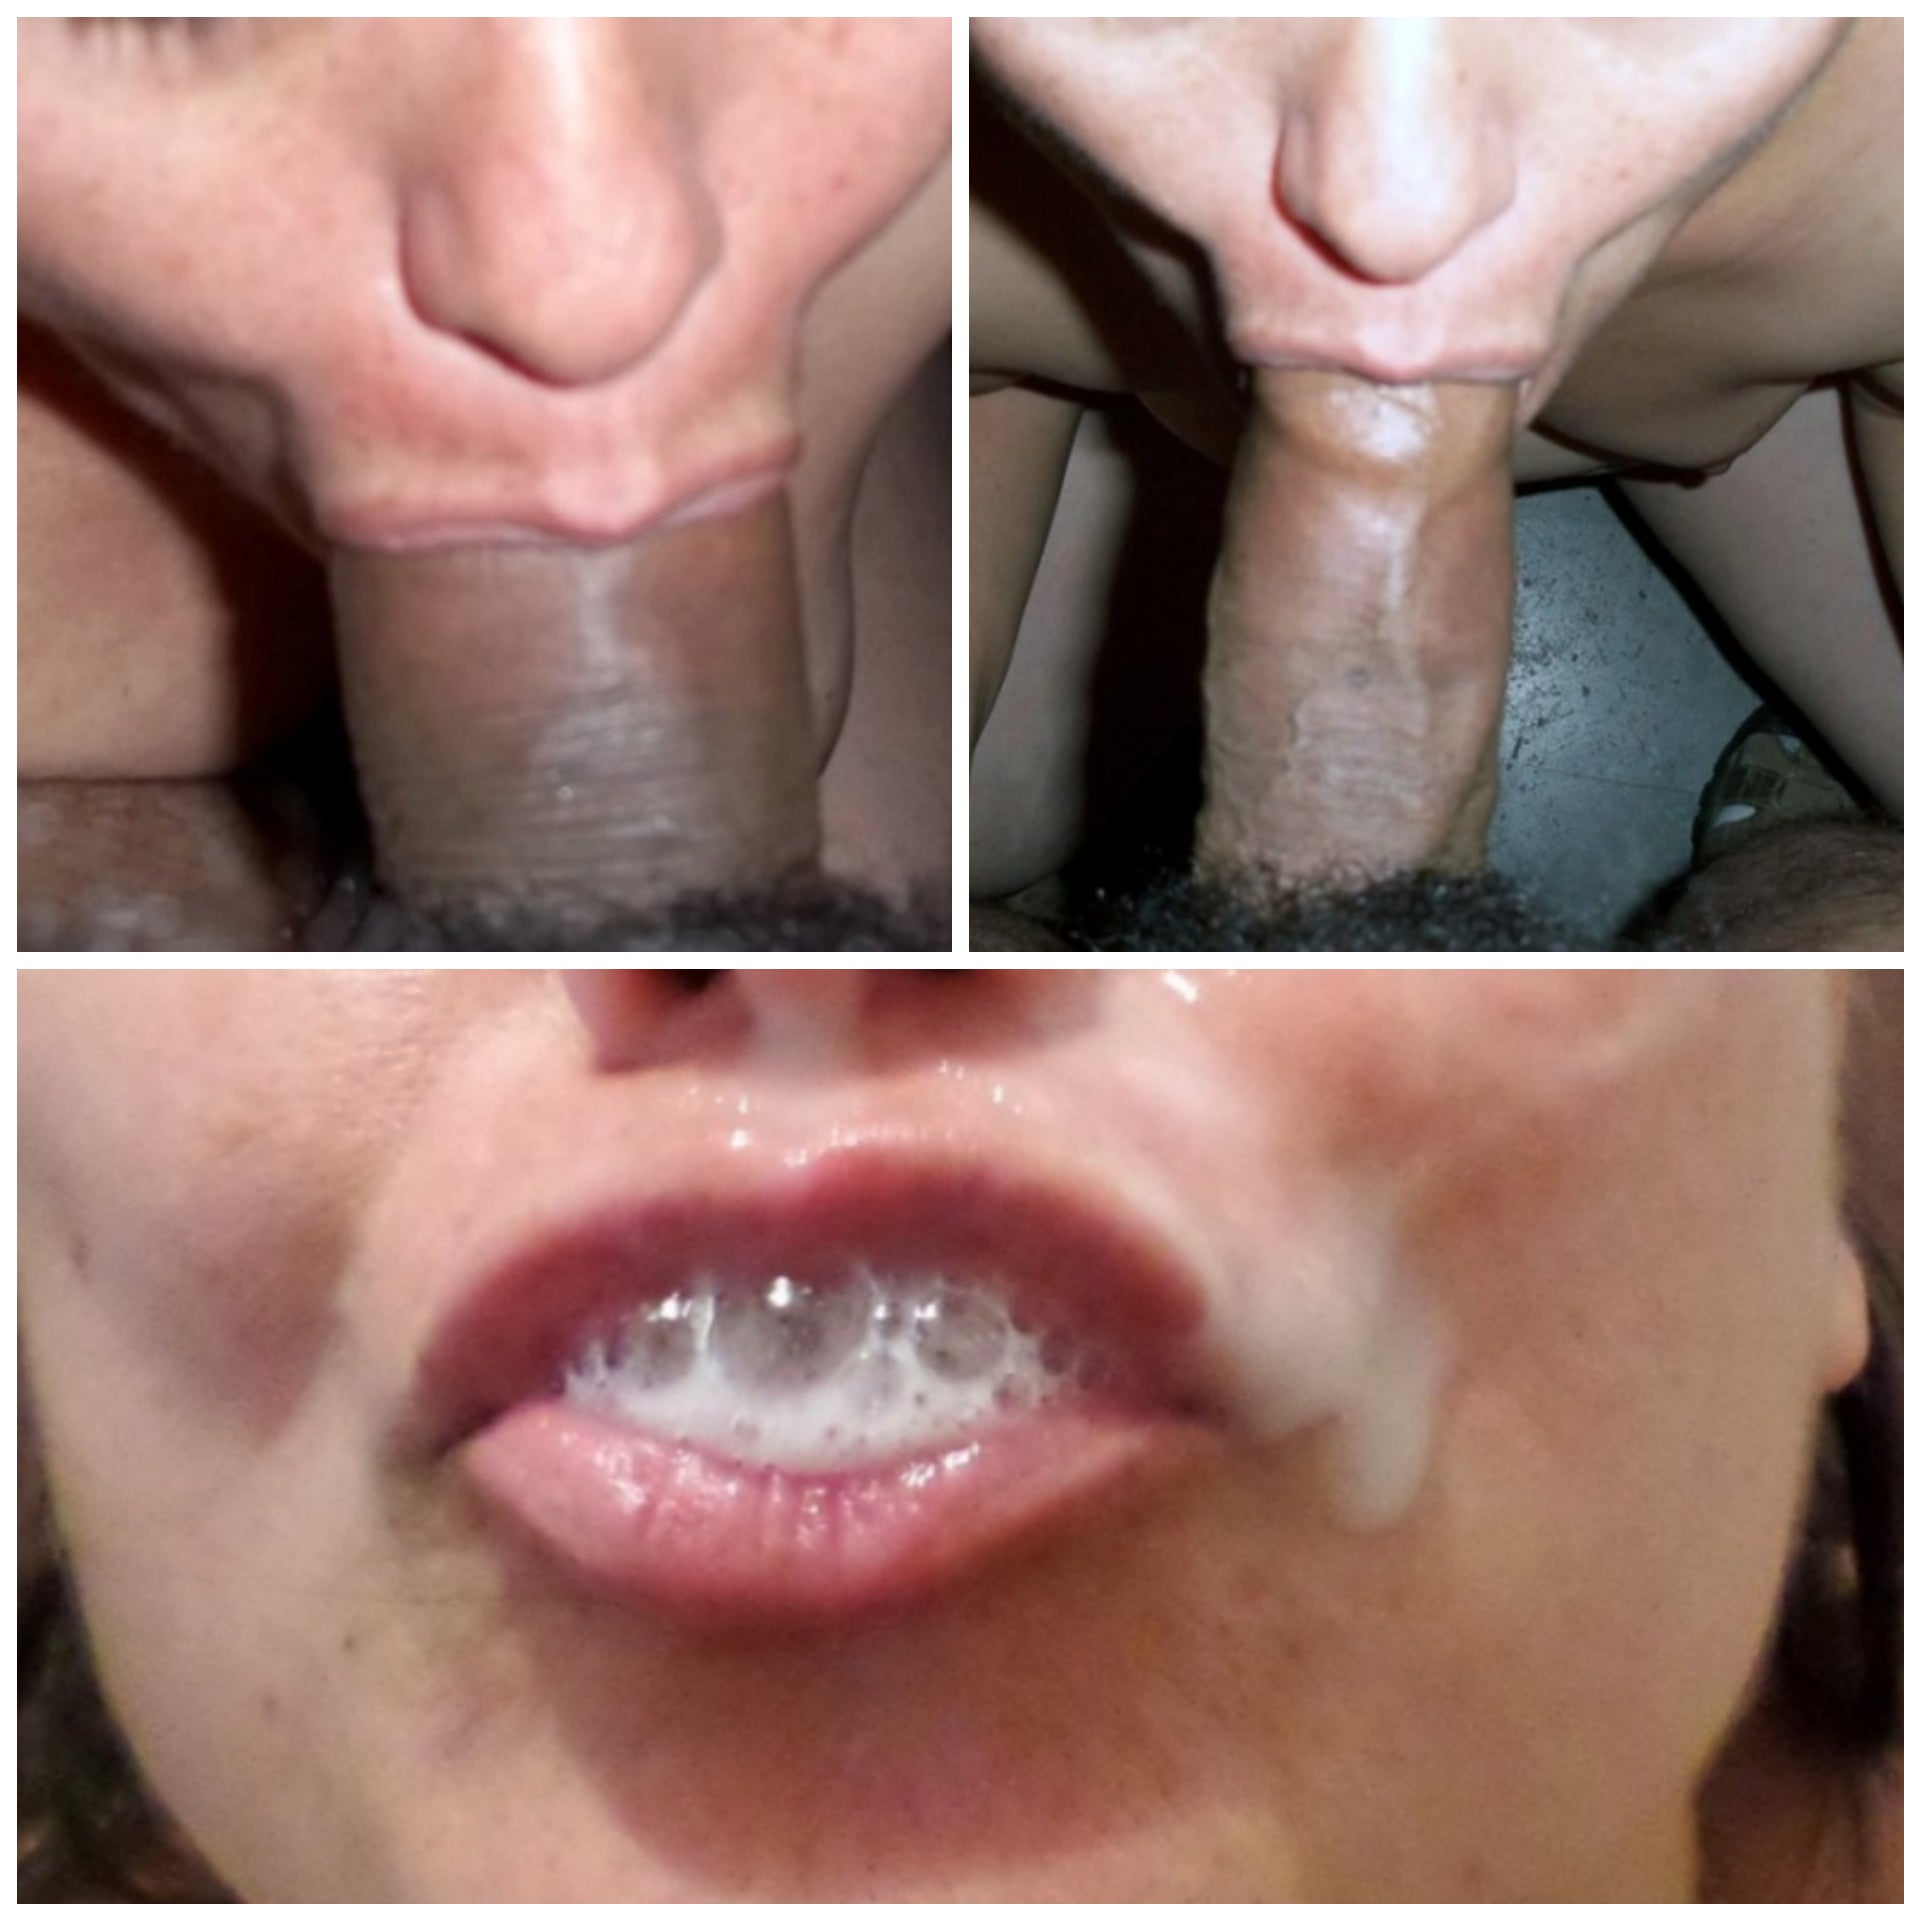 Wife finally agreed to meet up with a guy, just for a blowjob tho, but she did let him cum in her mouth which she never has let me do.